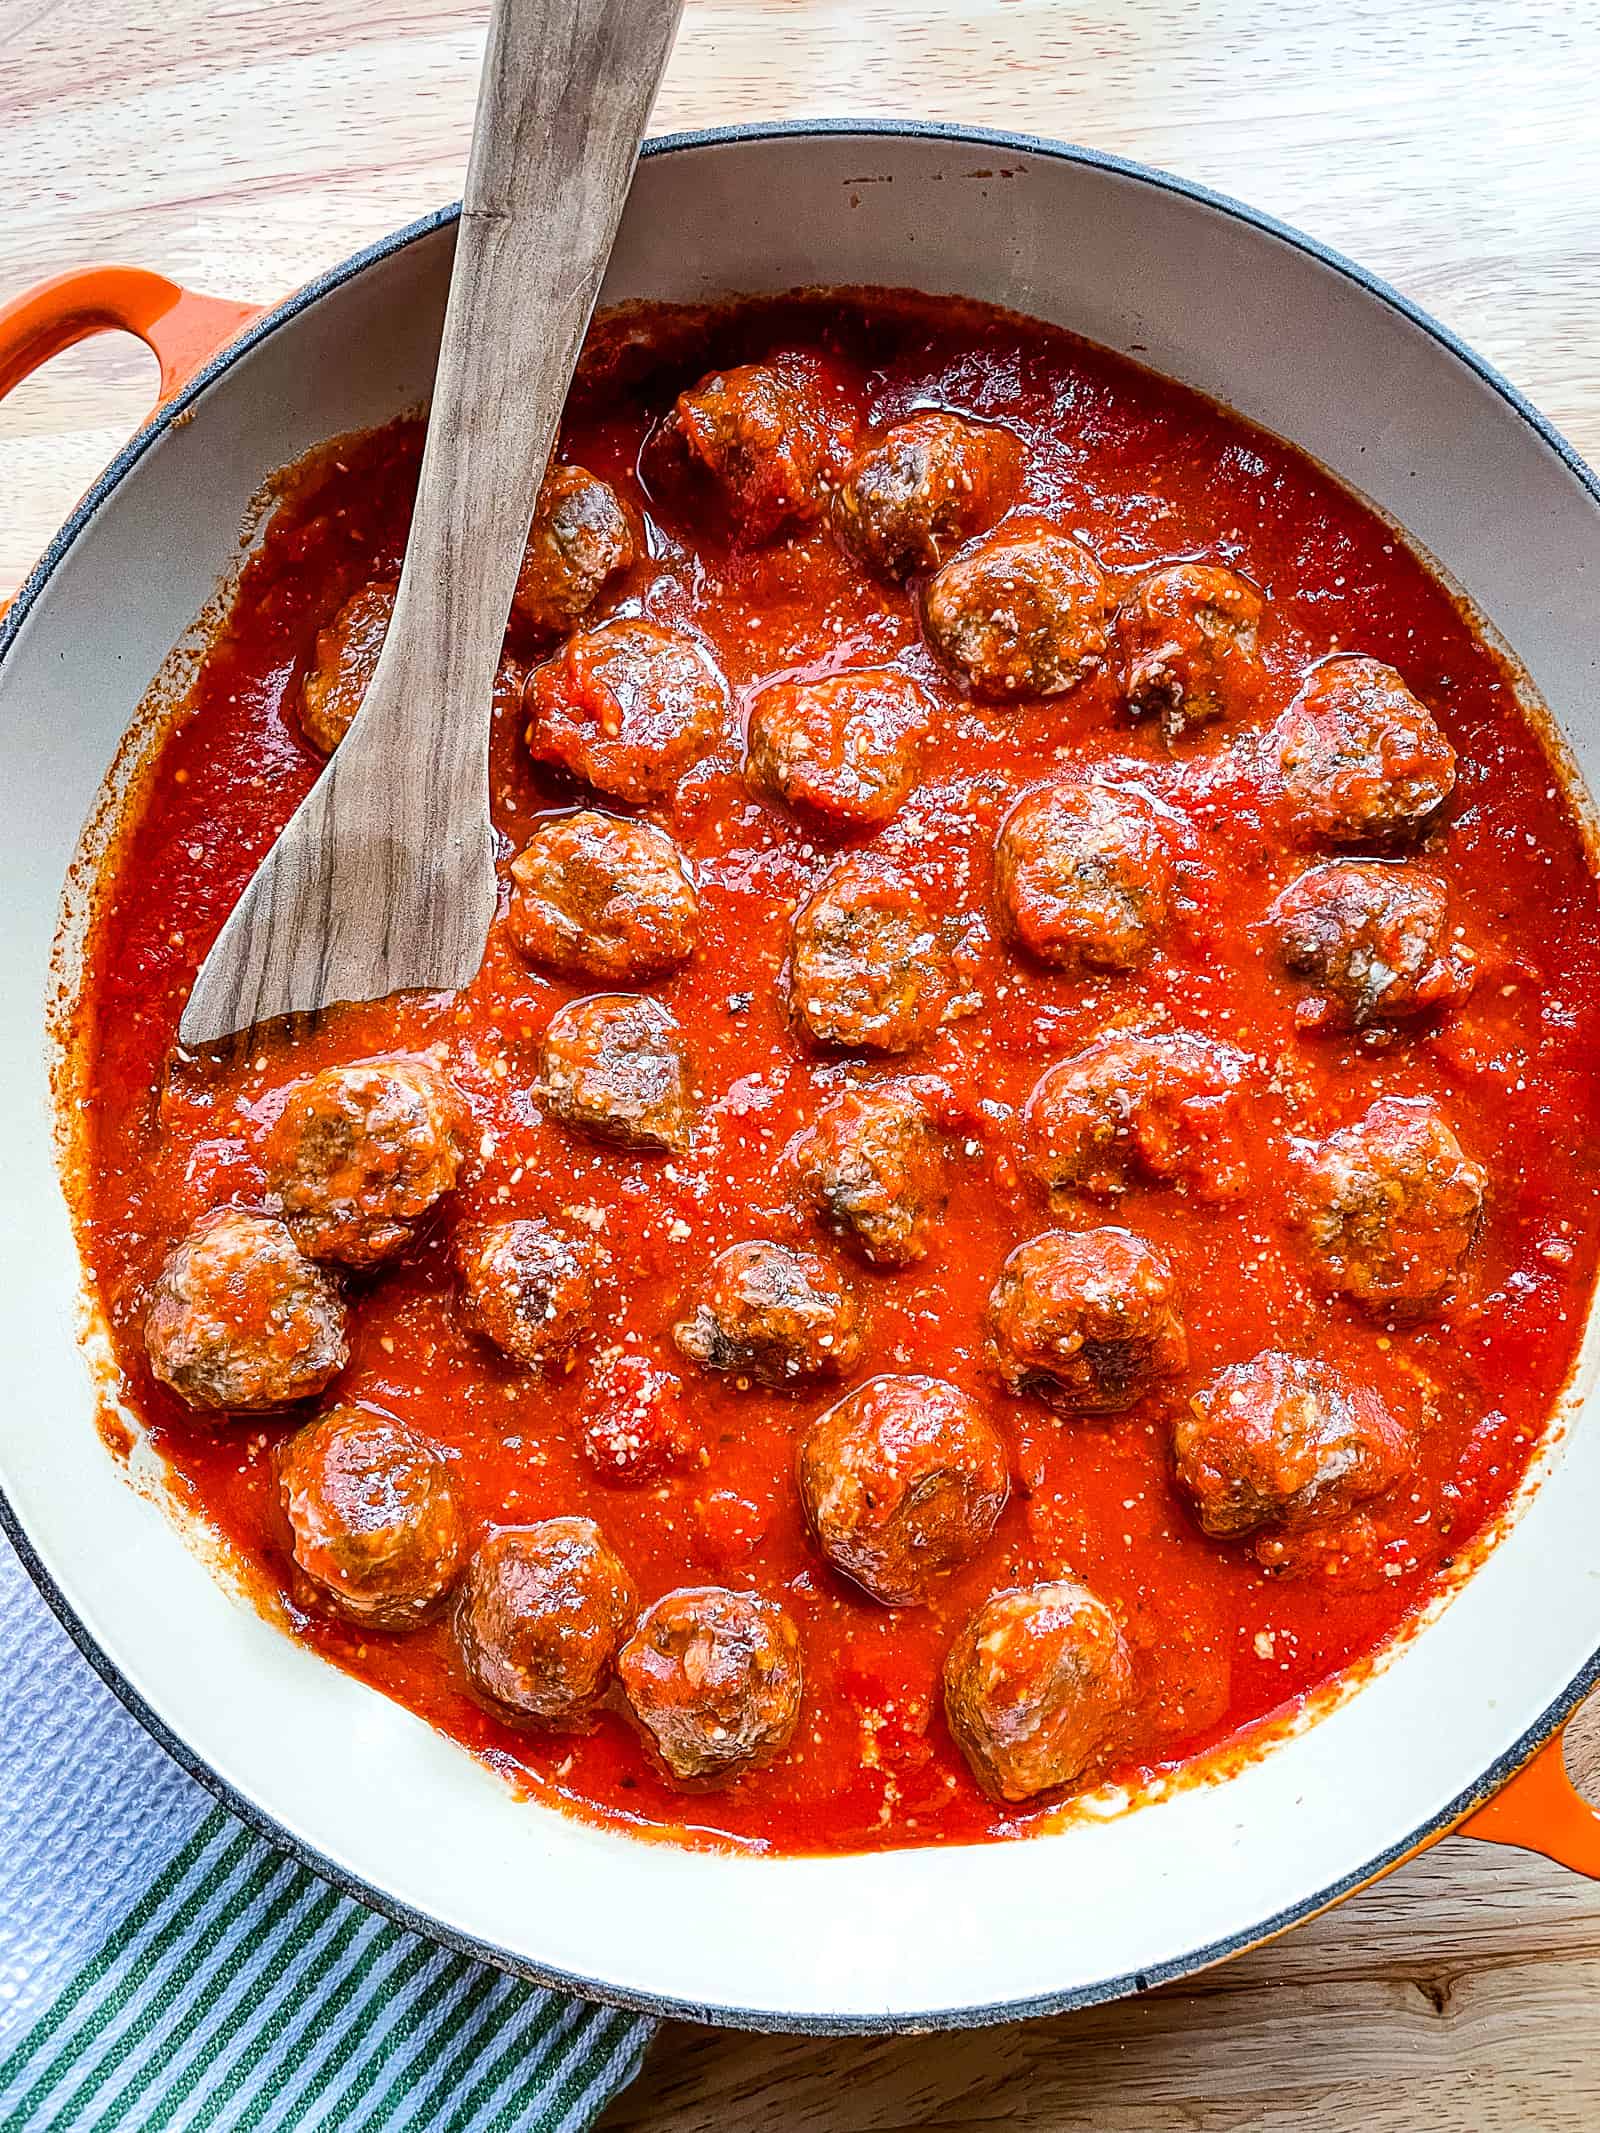 Pan of baked meatballs in pasta sauce. A wooden spoon sits off to the side.